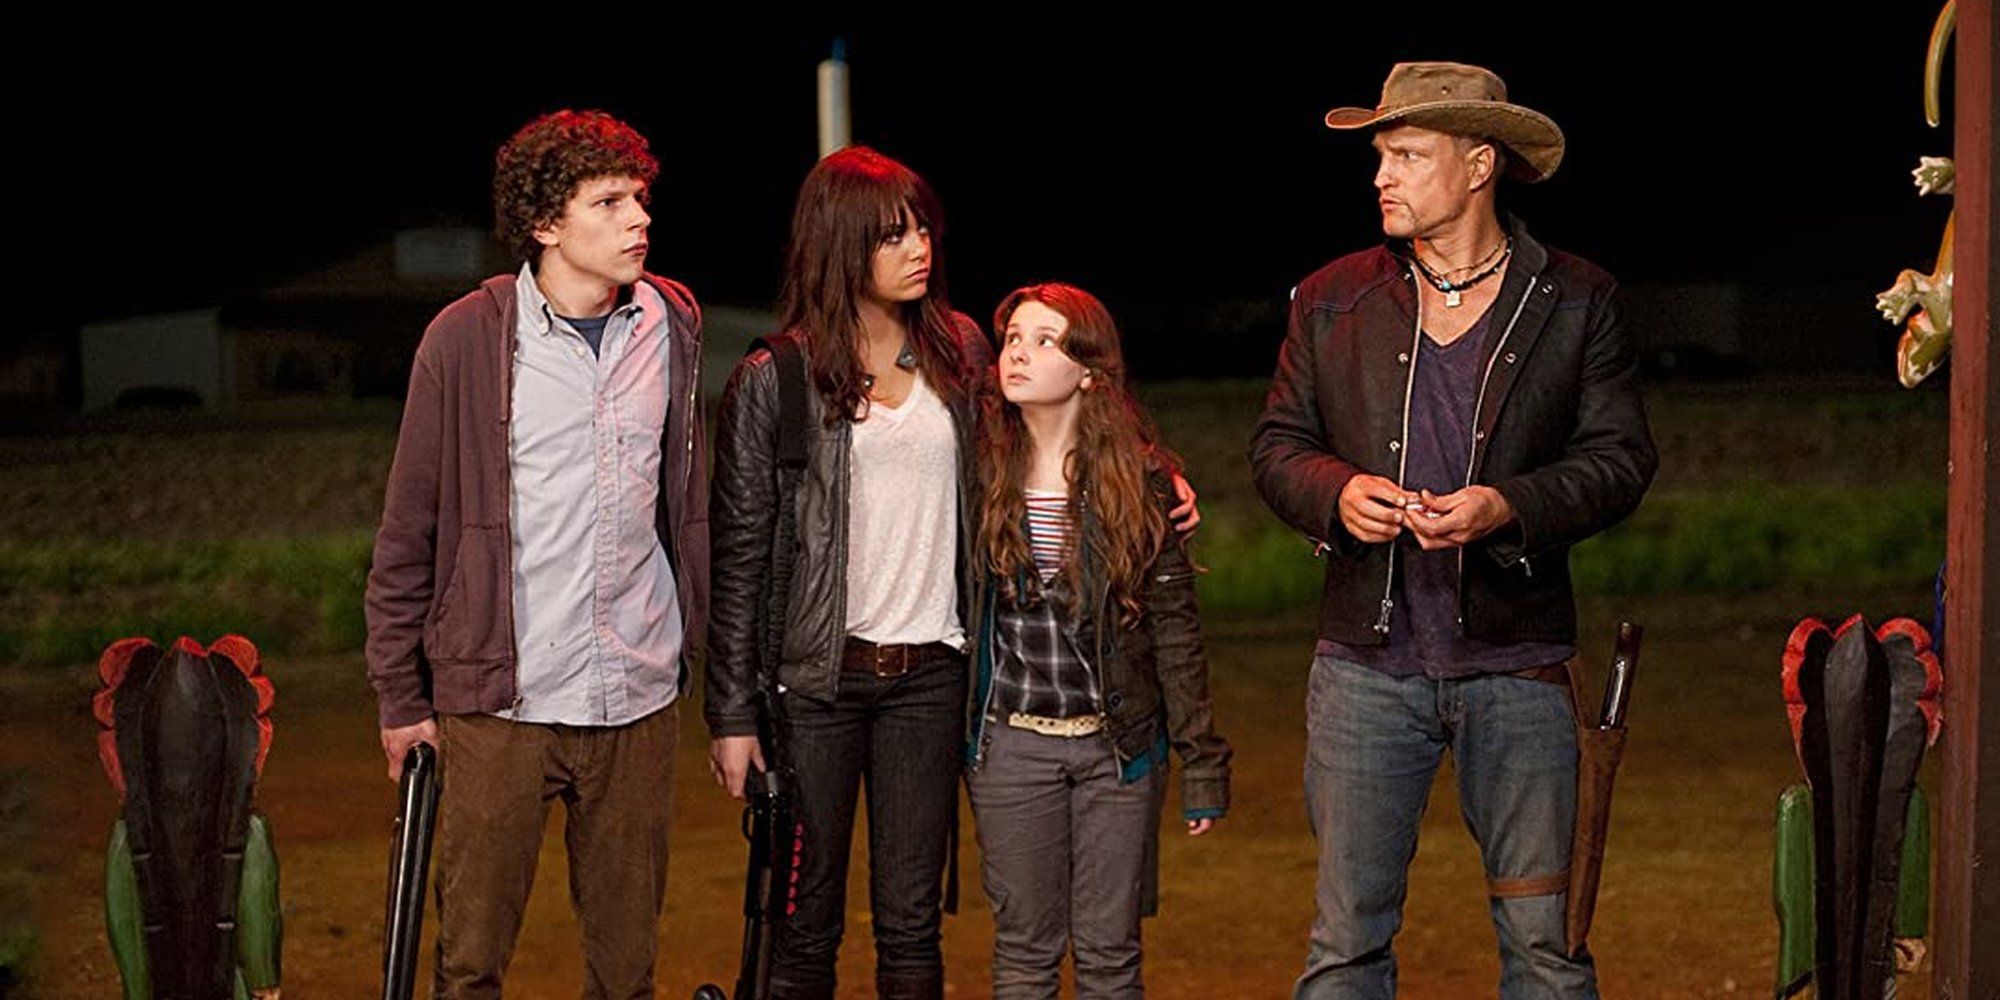 The cast stands side by side in Zombieland